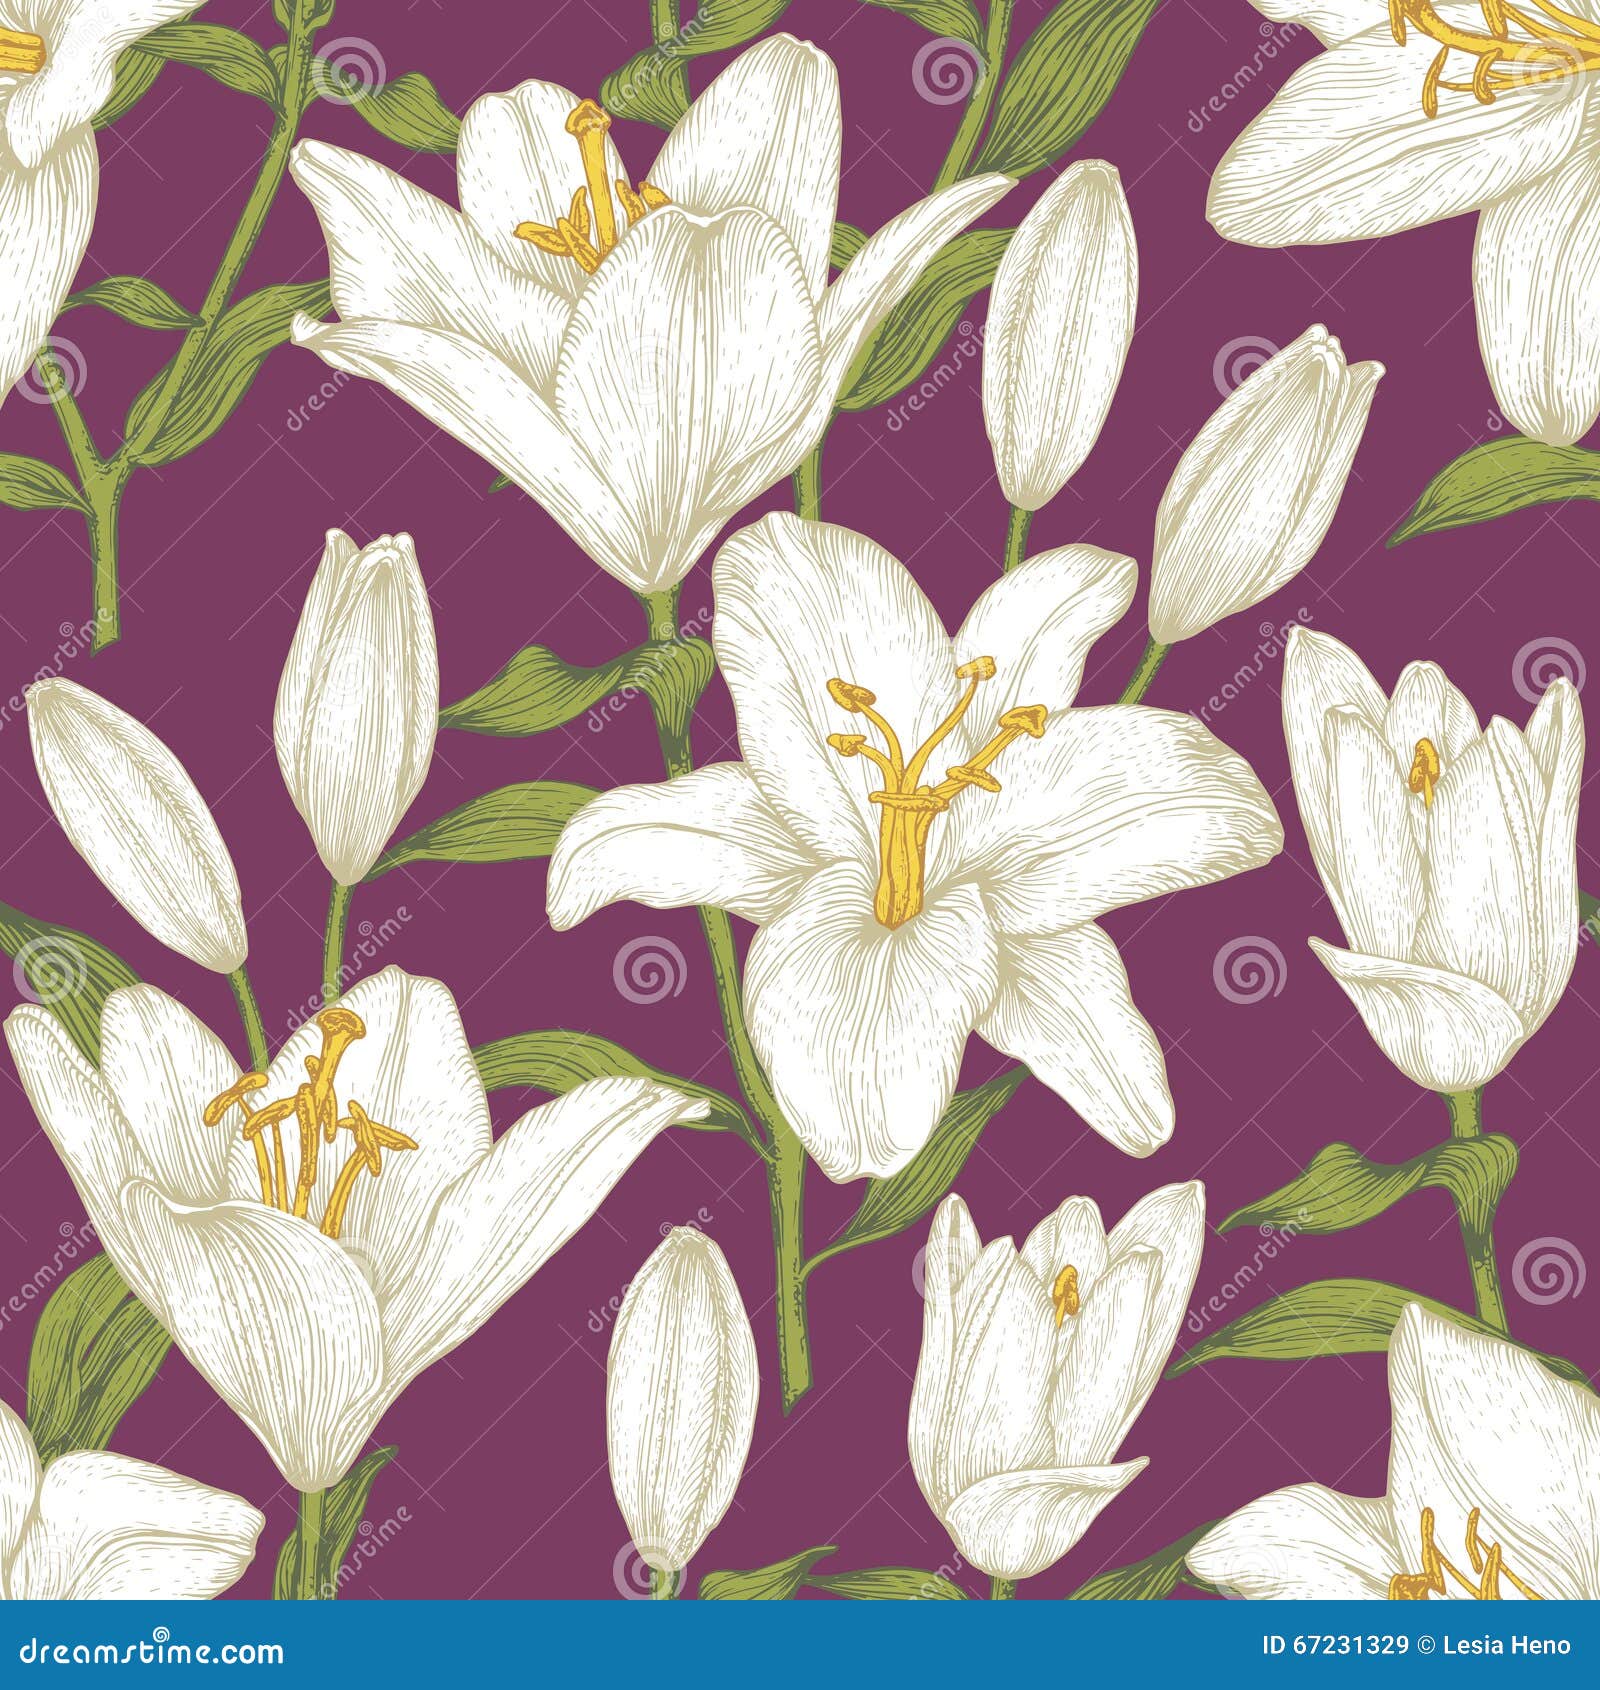  floral seamless pattern with white lilies.